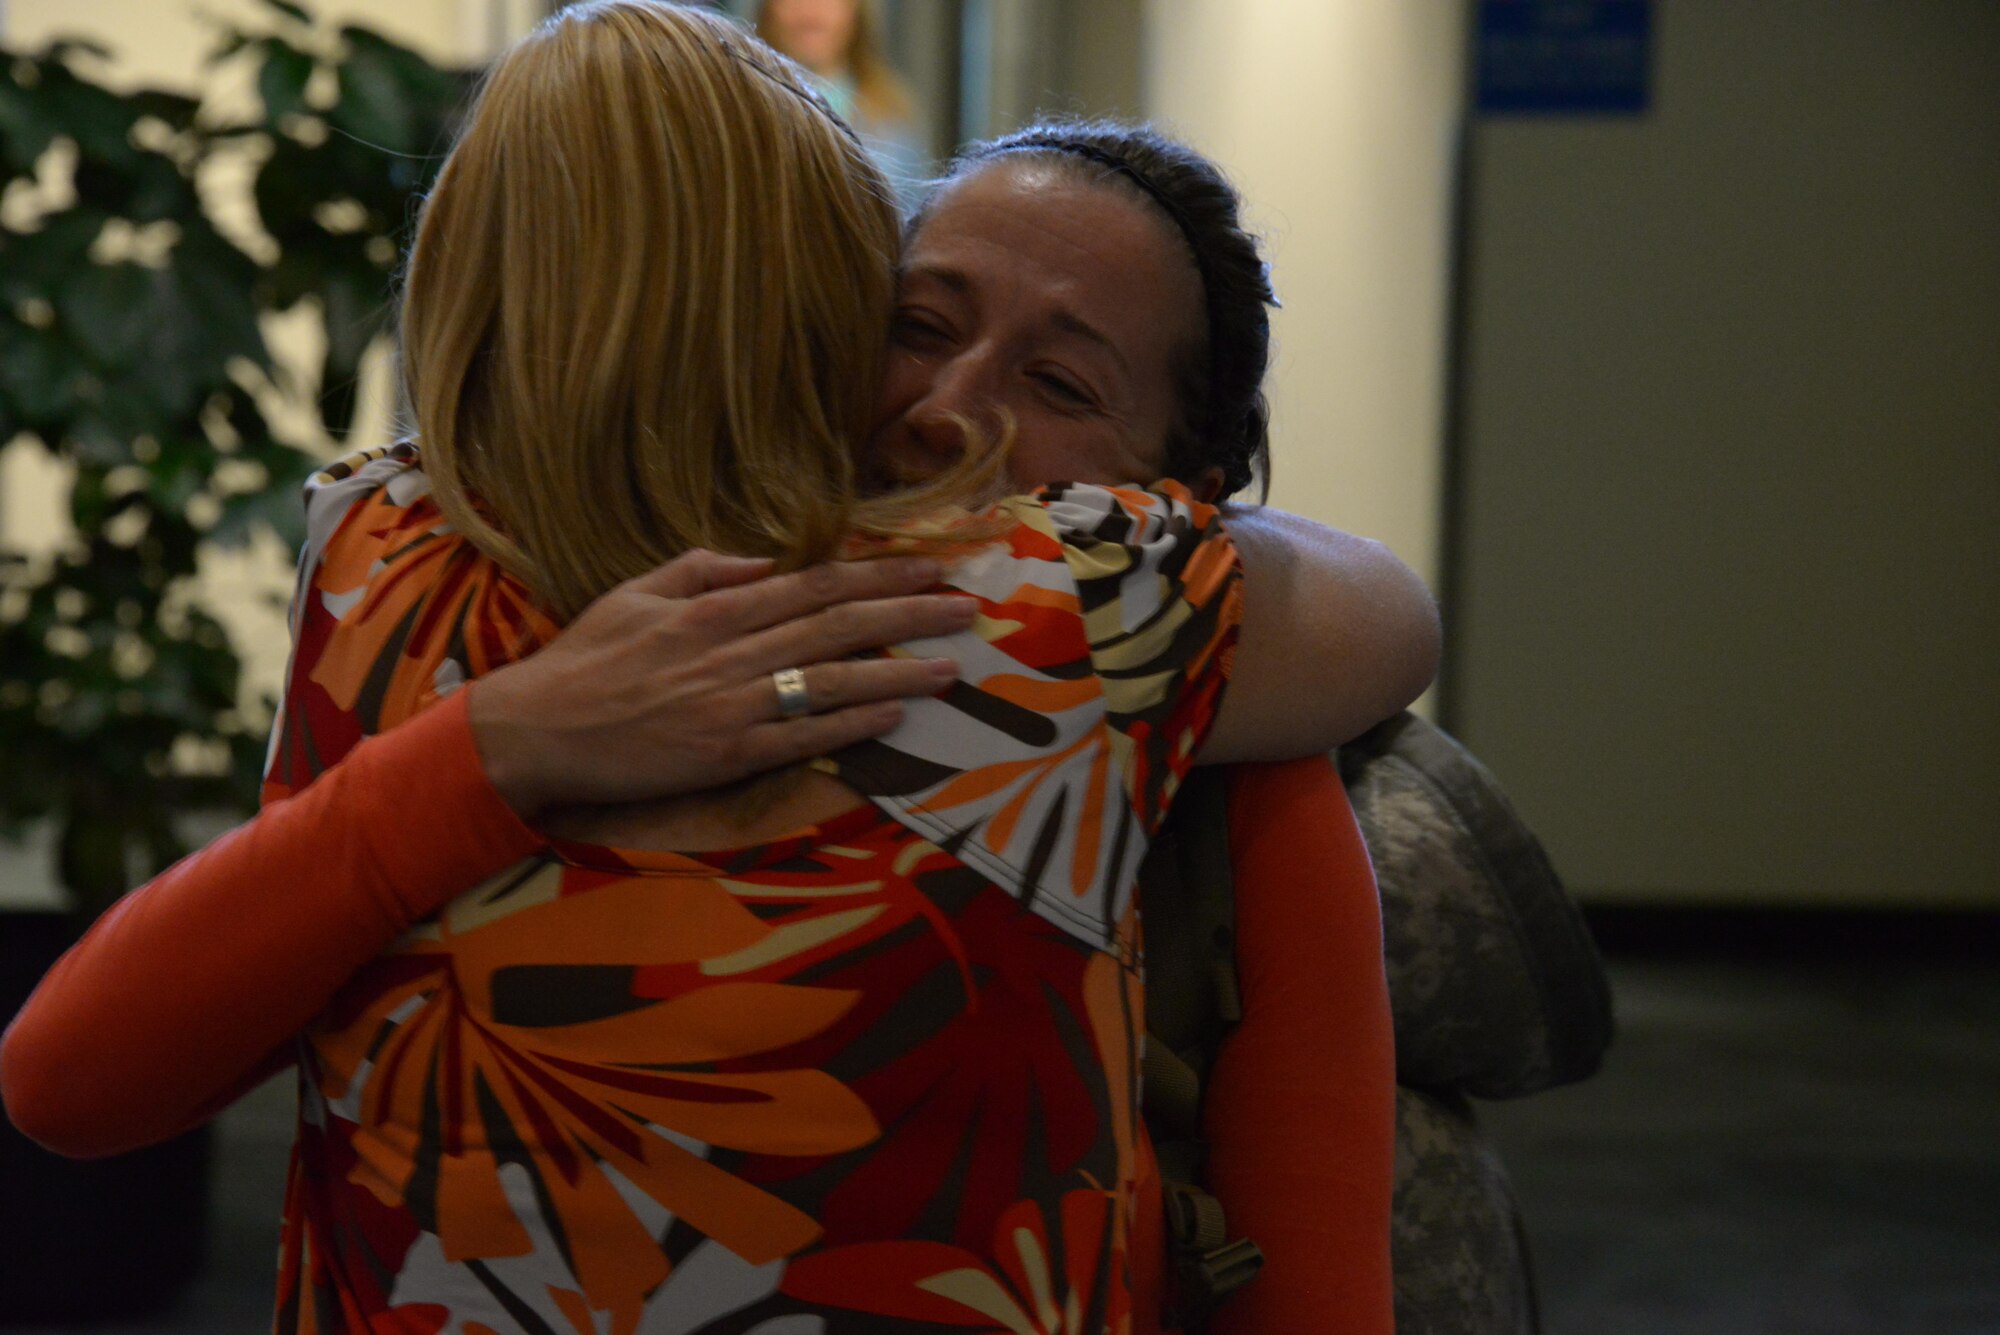 Tech. Sgt. Brianna Oberg embraces her co-worker, Candace Akerson, after returning from a deployment, Oct. 28, 2016. Air University Headquarters planned a welcoming party at the airport, gathering 16 Airmen to see their returned office member.  (U.S. Air Force photo by Senior Airman William Blankenship)